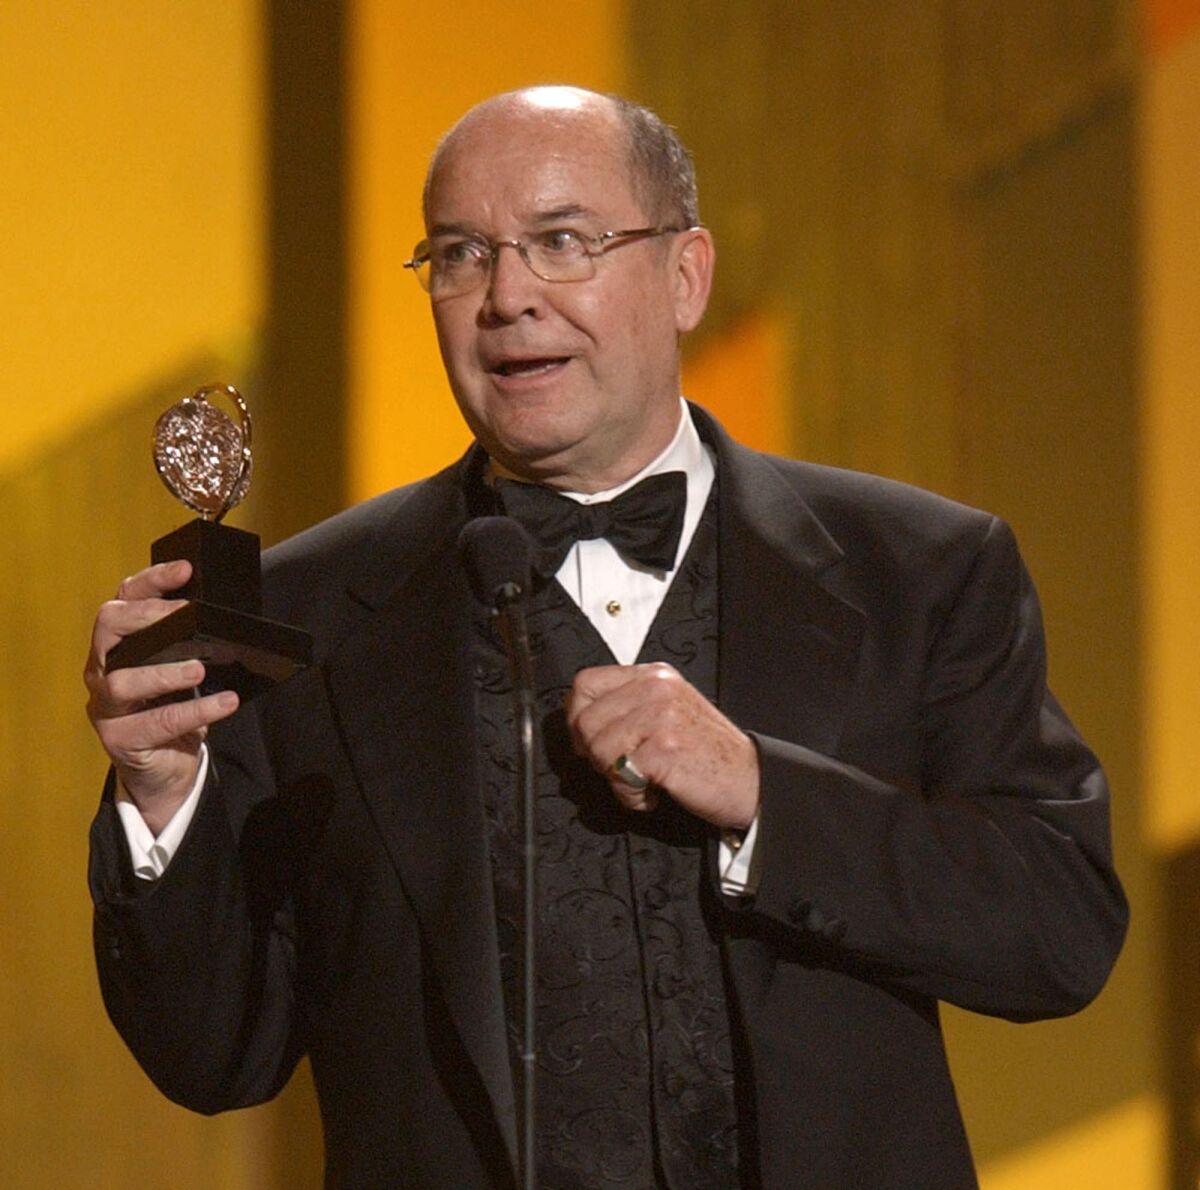 Jack O'Brien accepts his Tony Award in 2003 for directing "Hairspray."